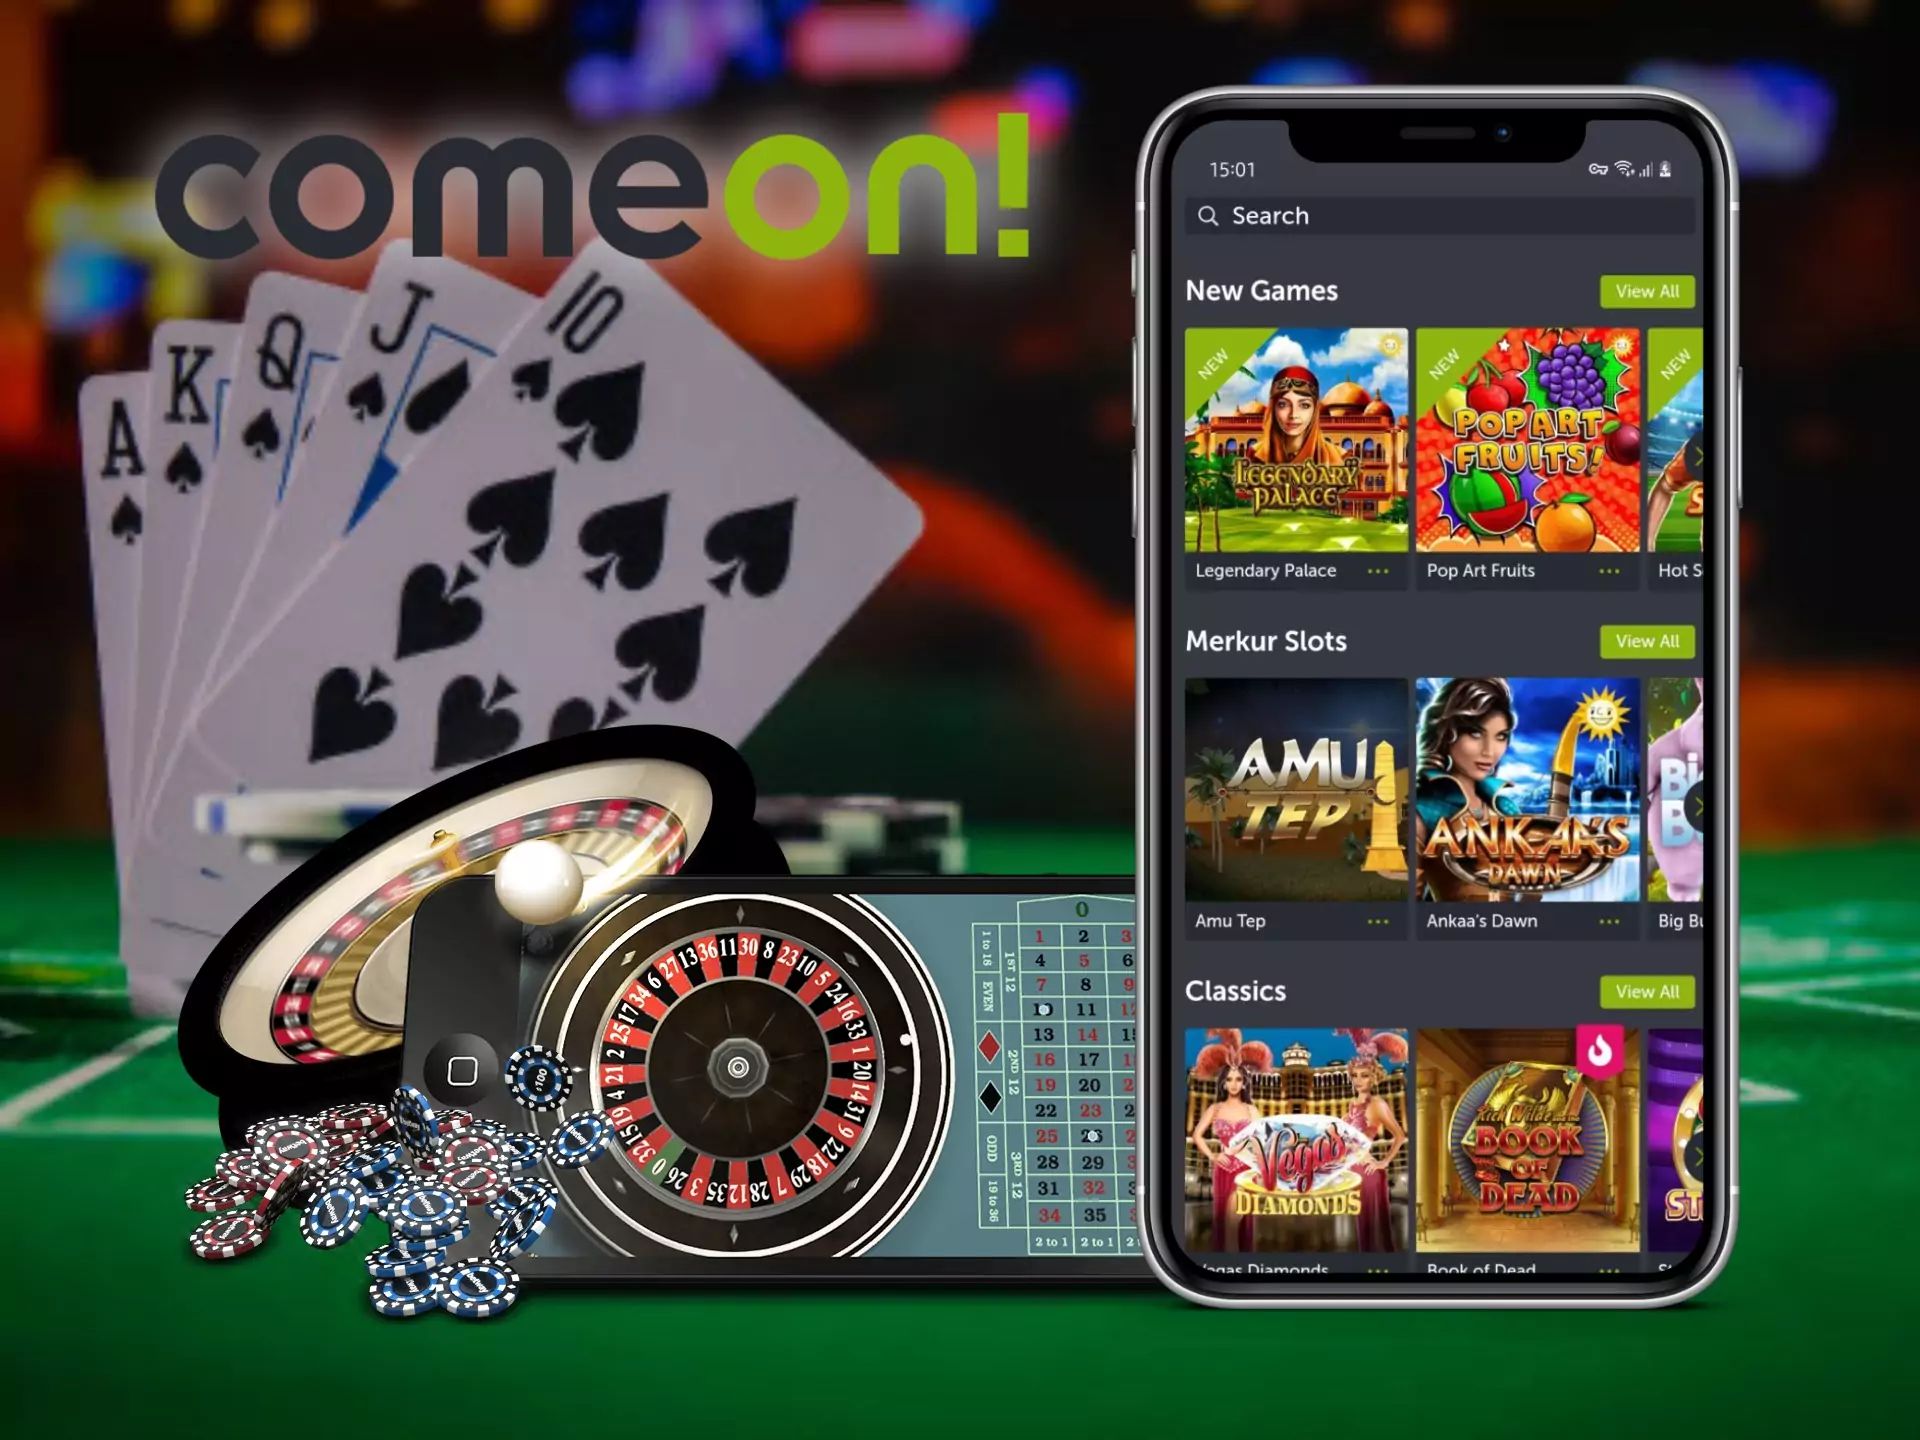 If you're tired of betting, you can play casino games at ComeOn too.